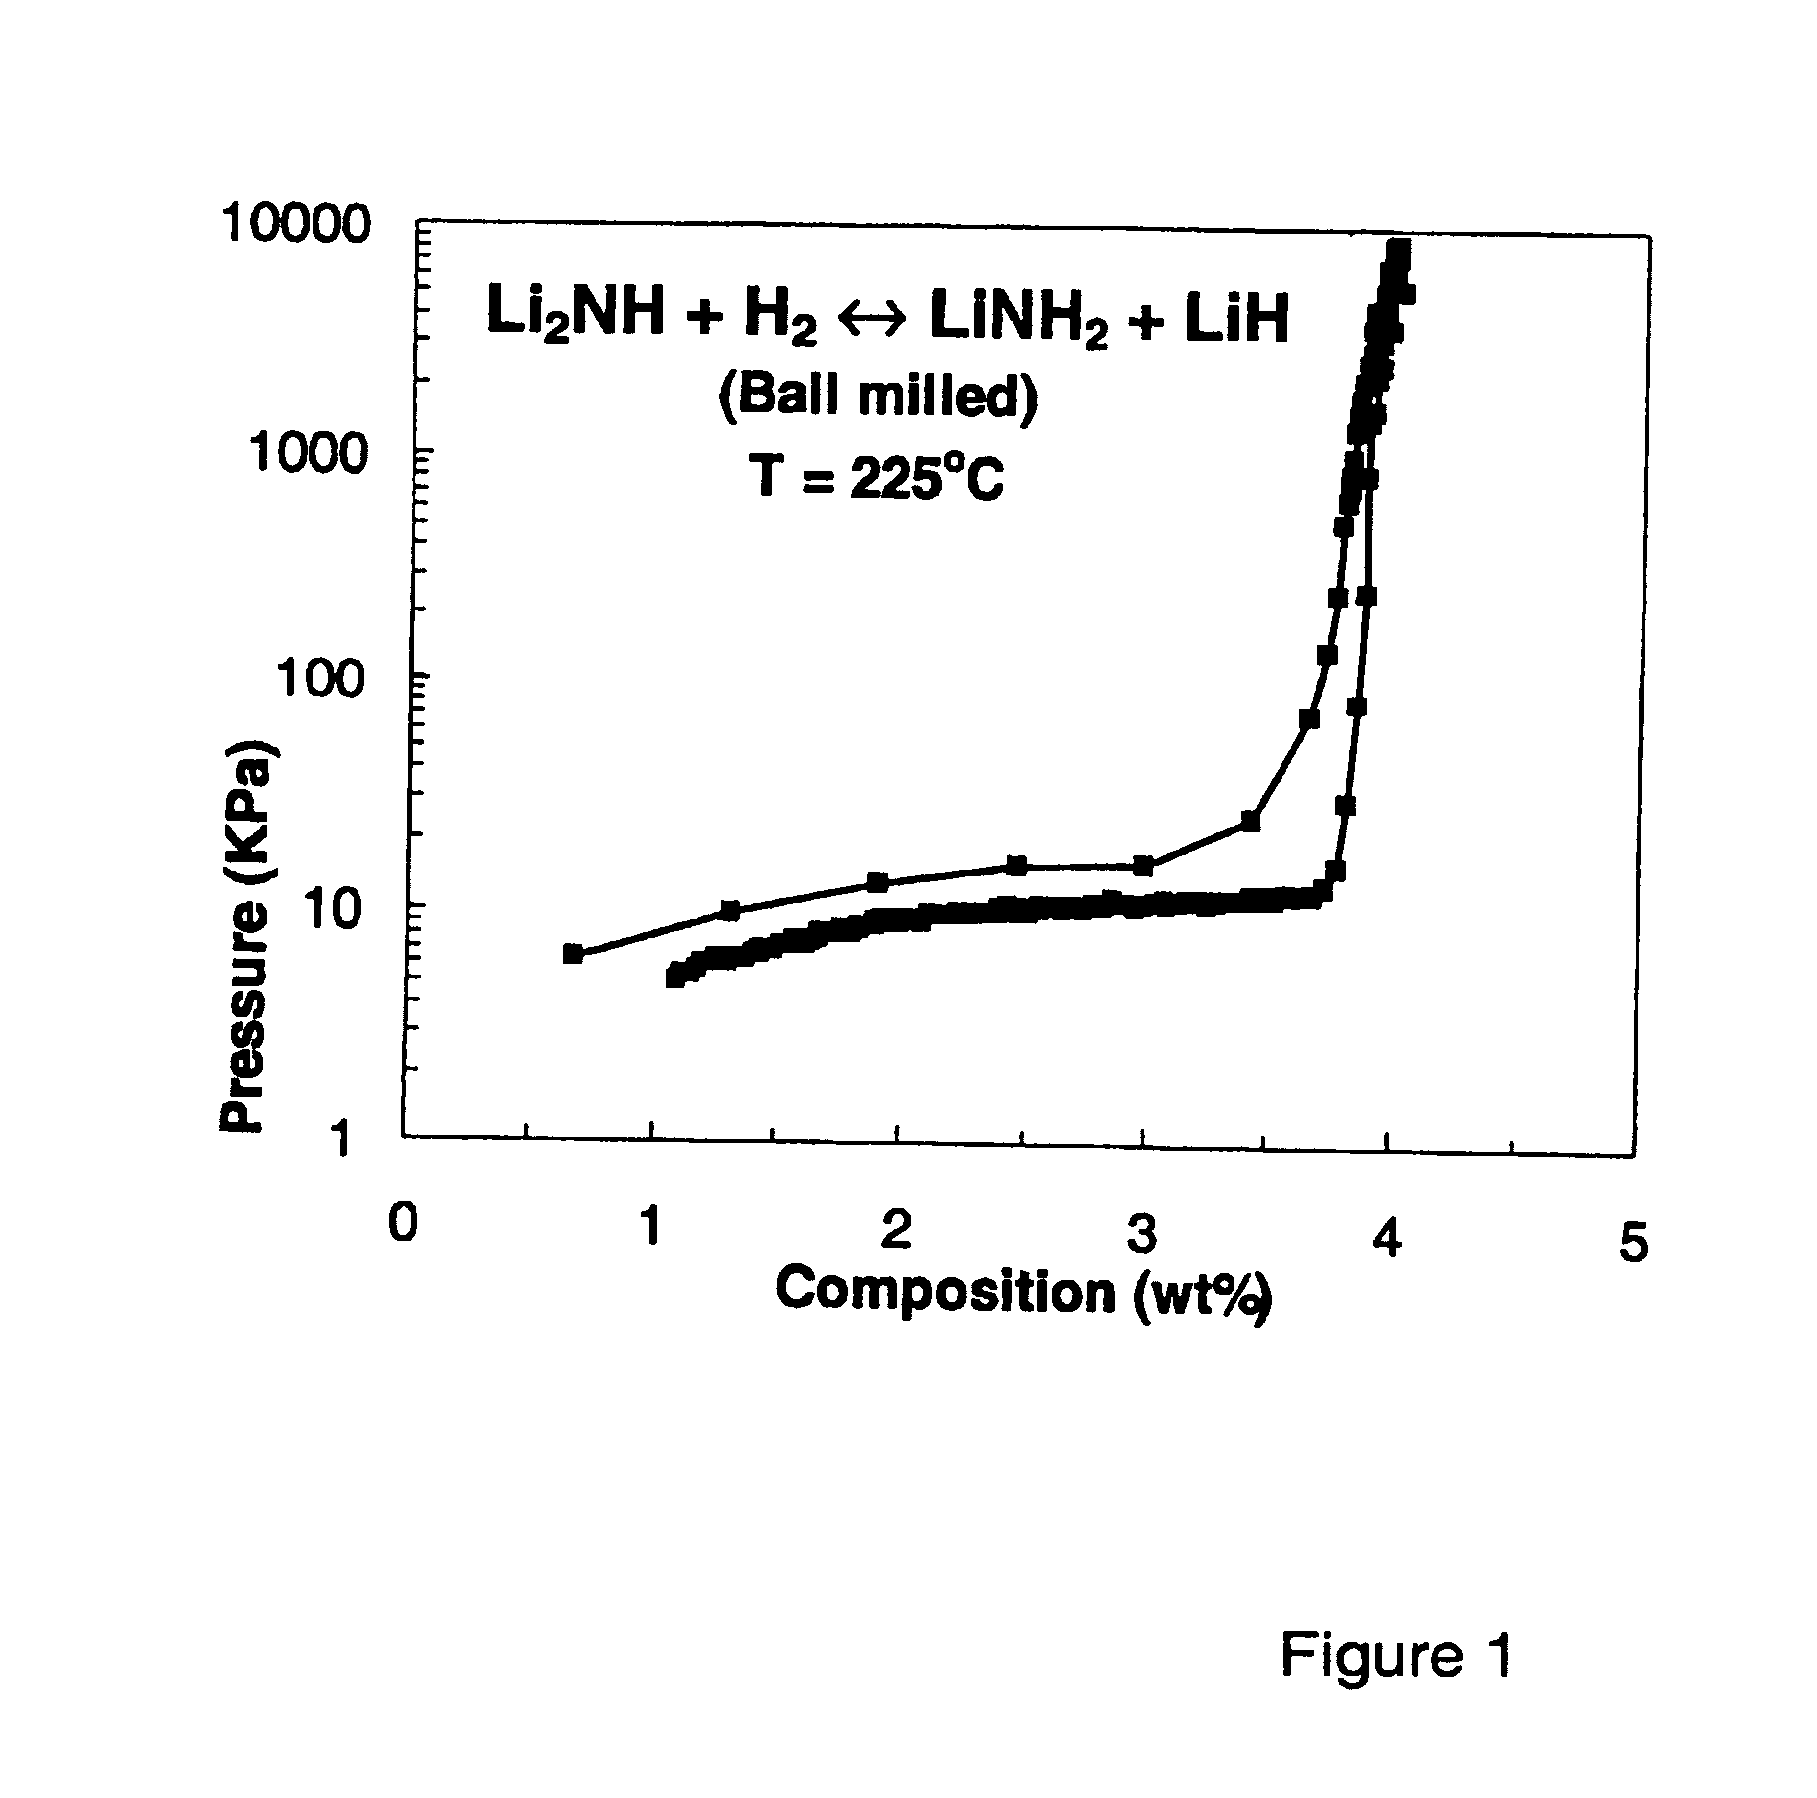 Imide/amide hydrogen storage materials and methods